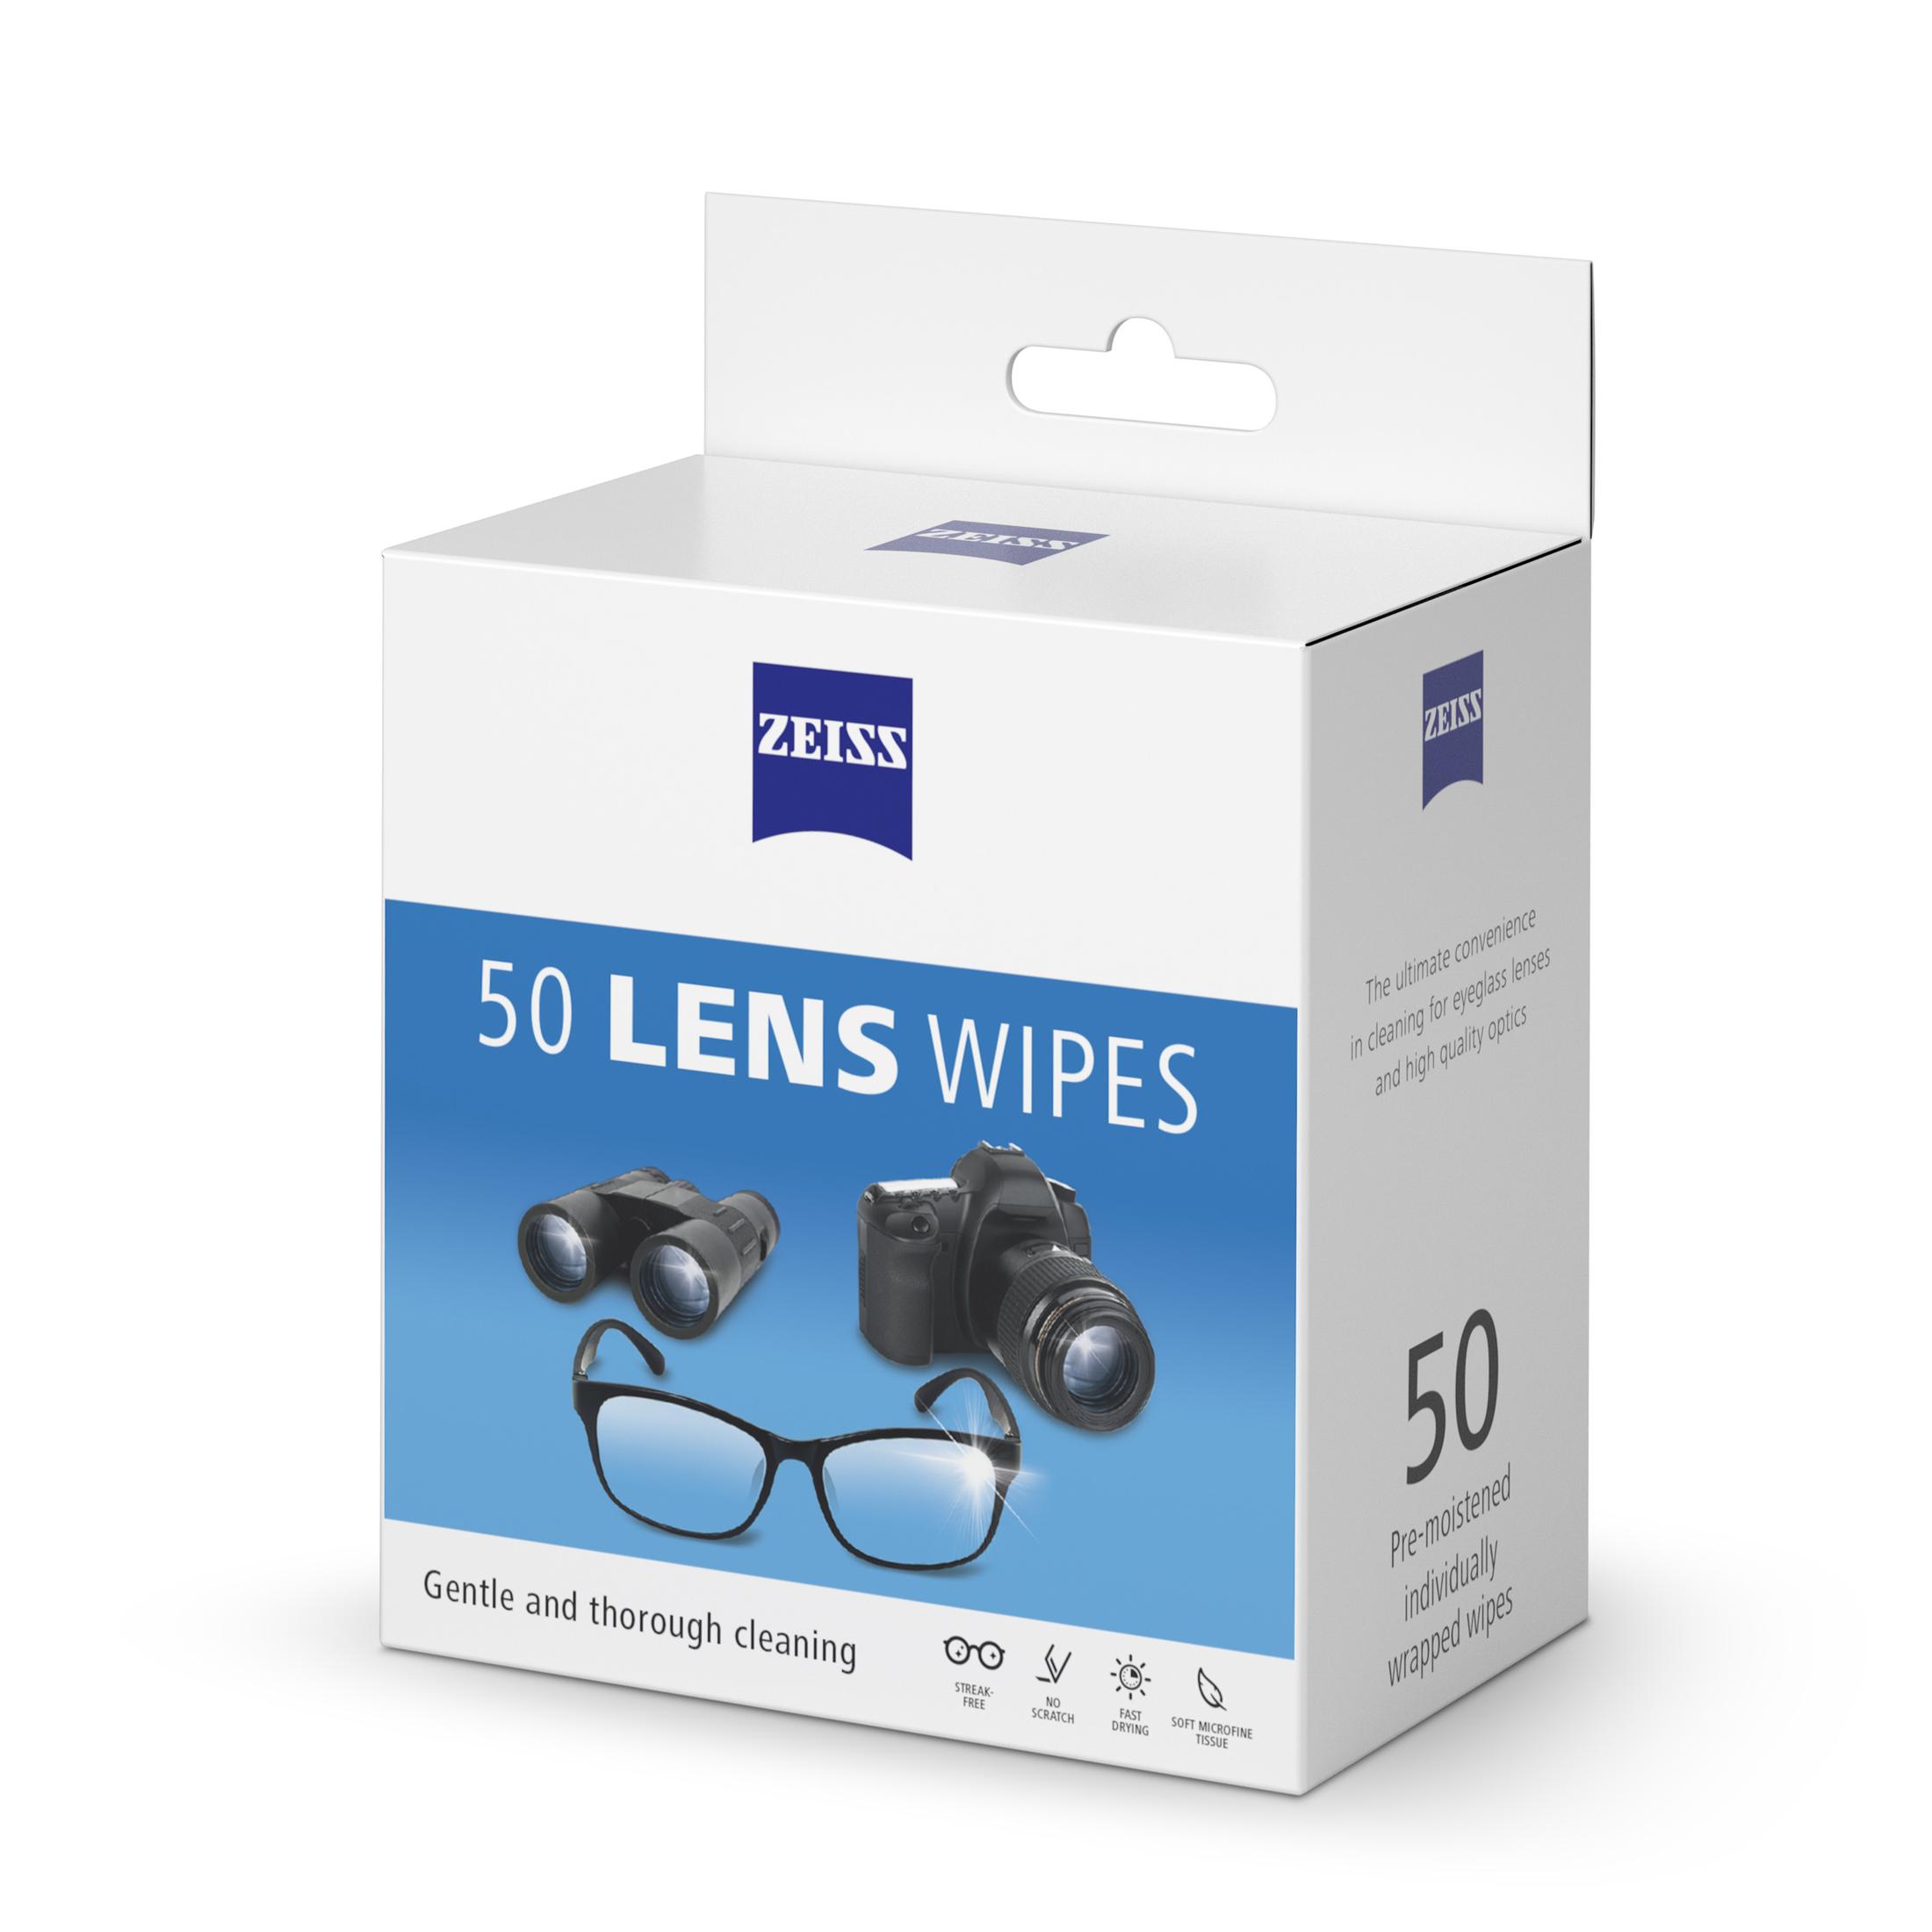 ZEISS Gentle and Thorough Cleaning Eyeglass Lens Cleaner Wipes, 50 Count - image 3 of 6